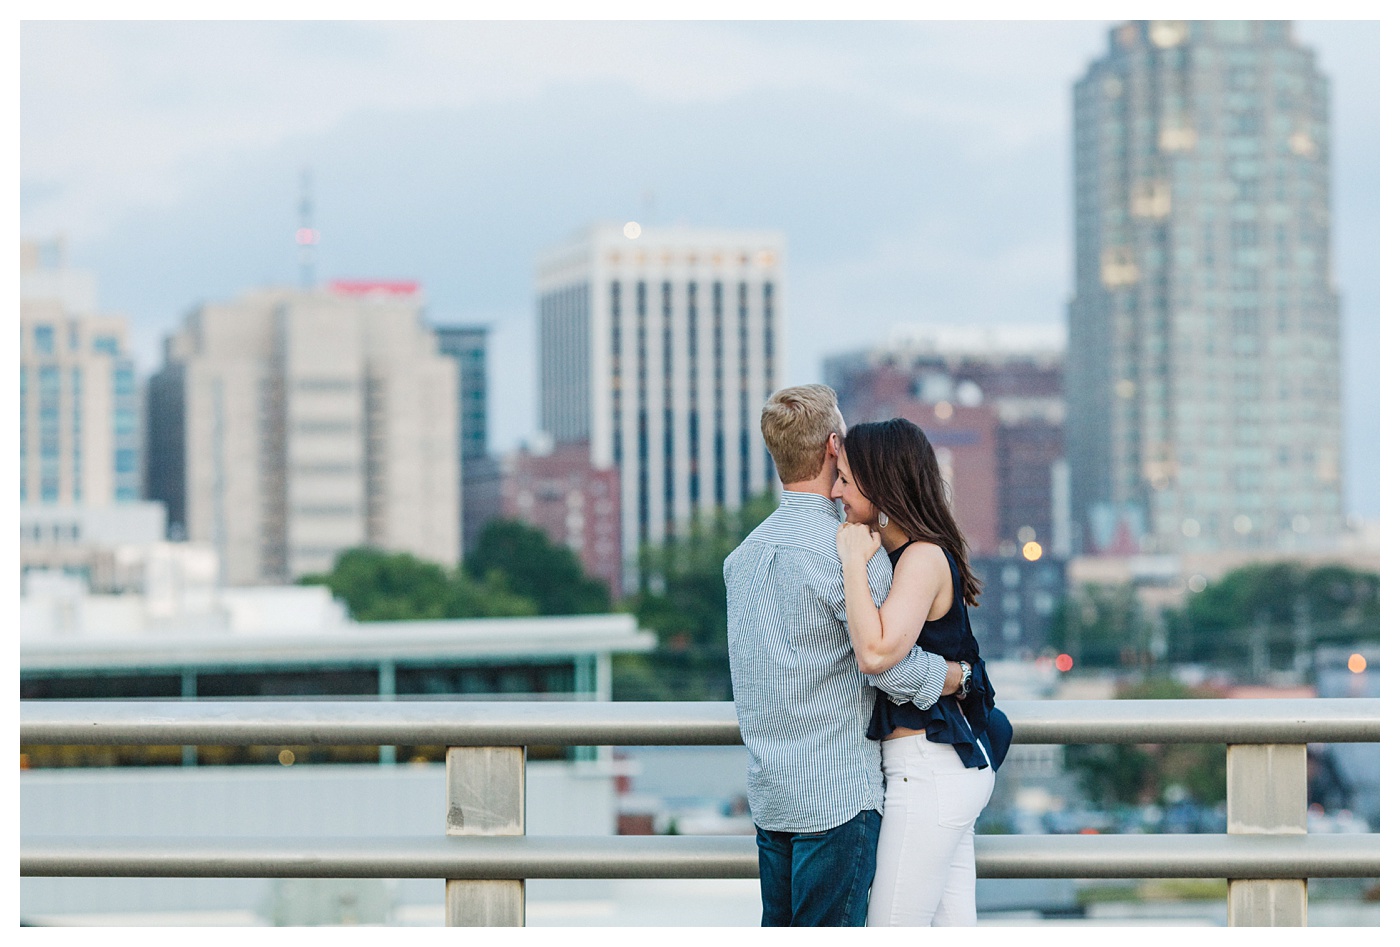 Downtown Raleigh Engagement Photos